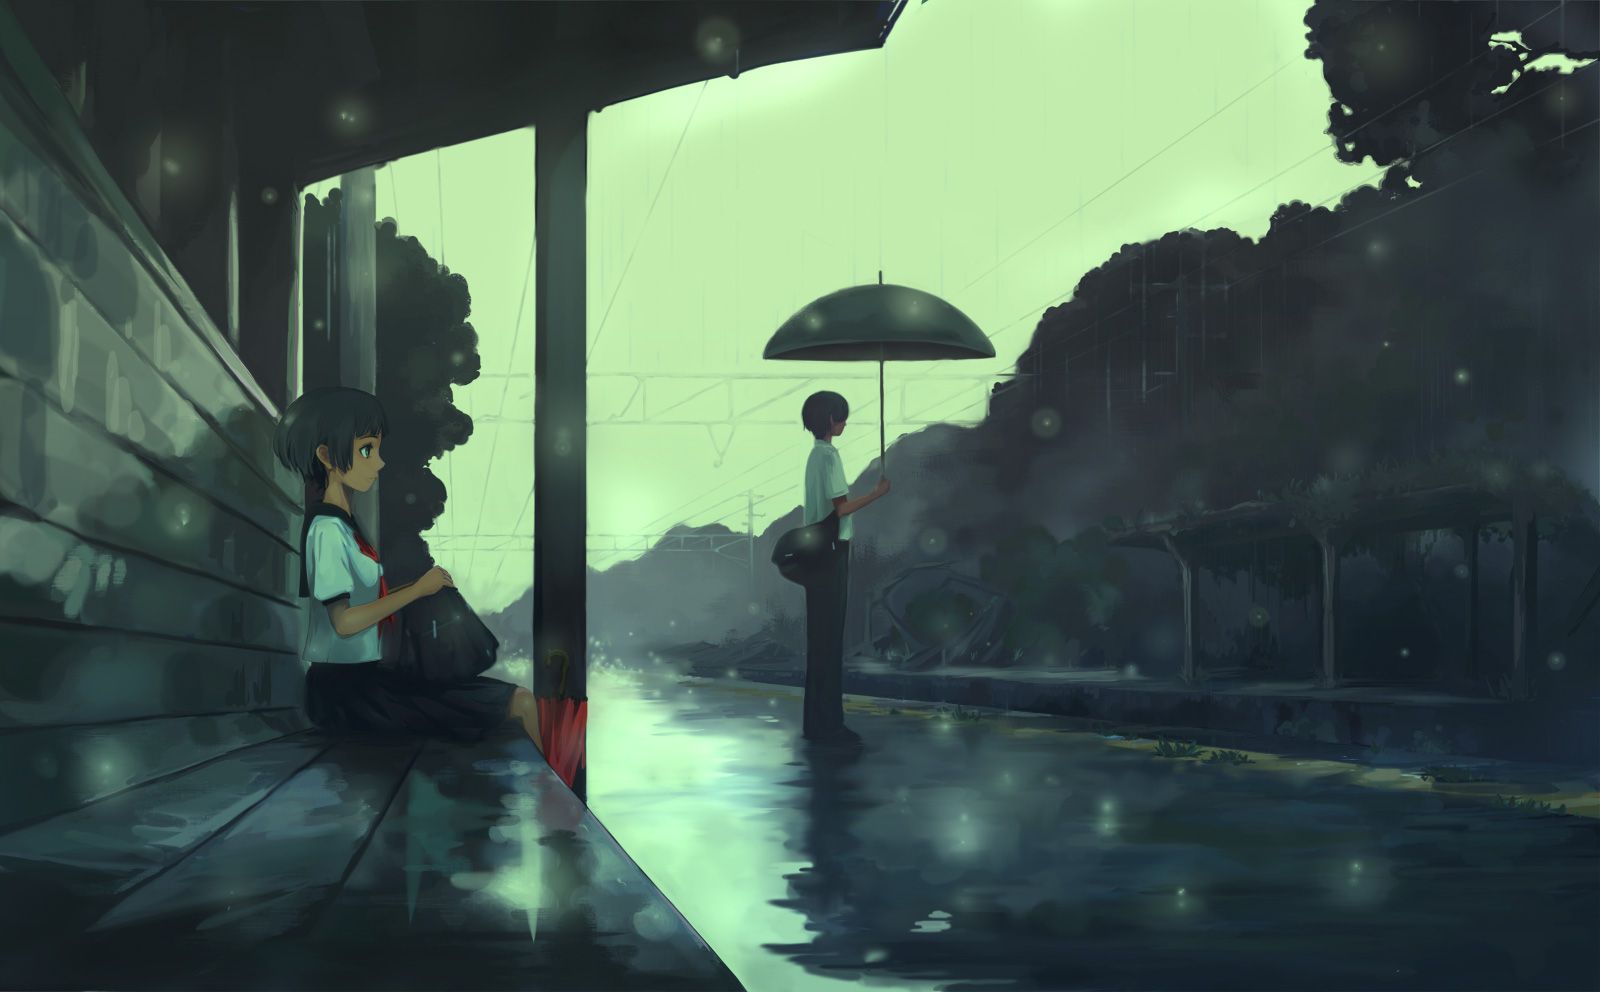 Rainy day graphic wallpaper hd anime wallpapers anime wallpaper